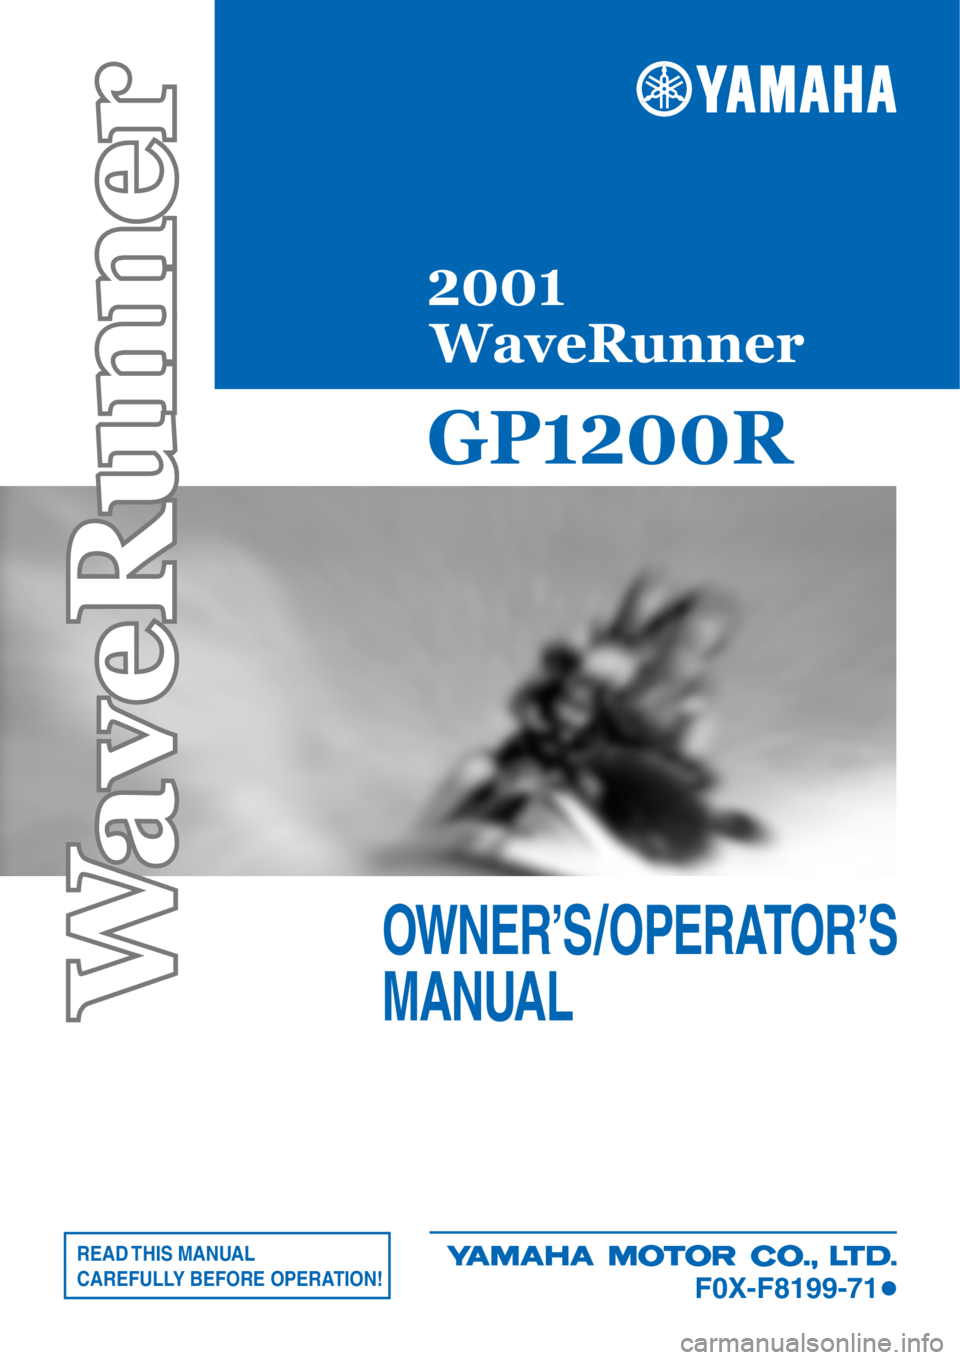 YAMAHA GP1200 2001  Owners Manual READ THIS  MANUAL
CAREFULLY BEFORE OPERATION!
OWNER’S / OPERATOR’S
MANUAL
F0X-F8199-71
GP1200R
2001
WaveRunner 